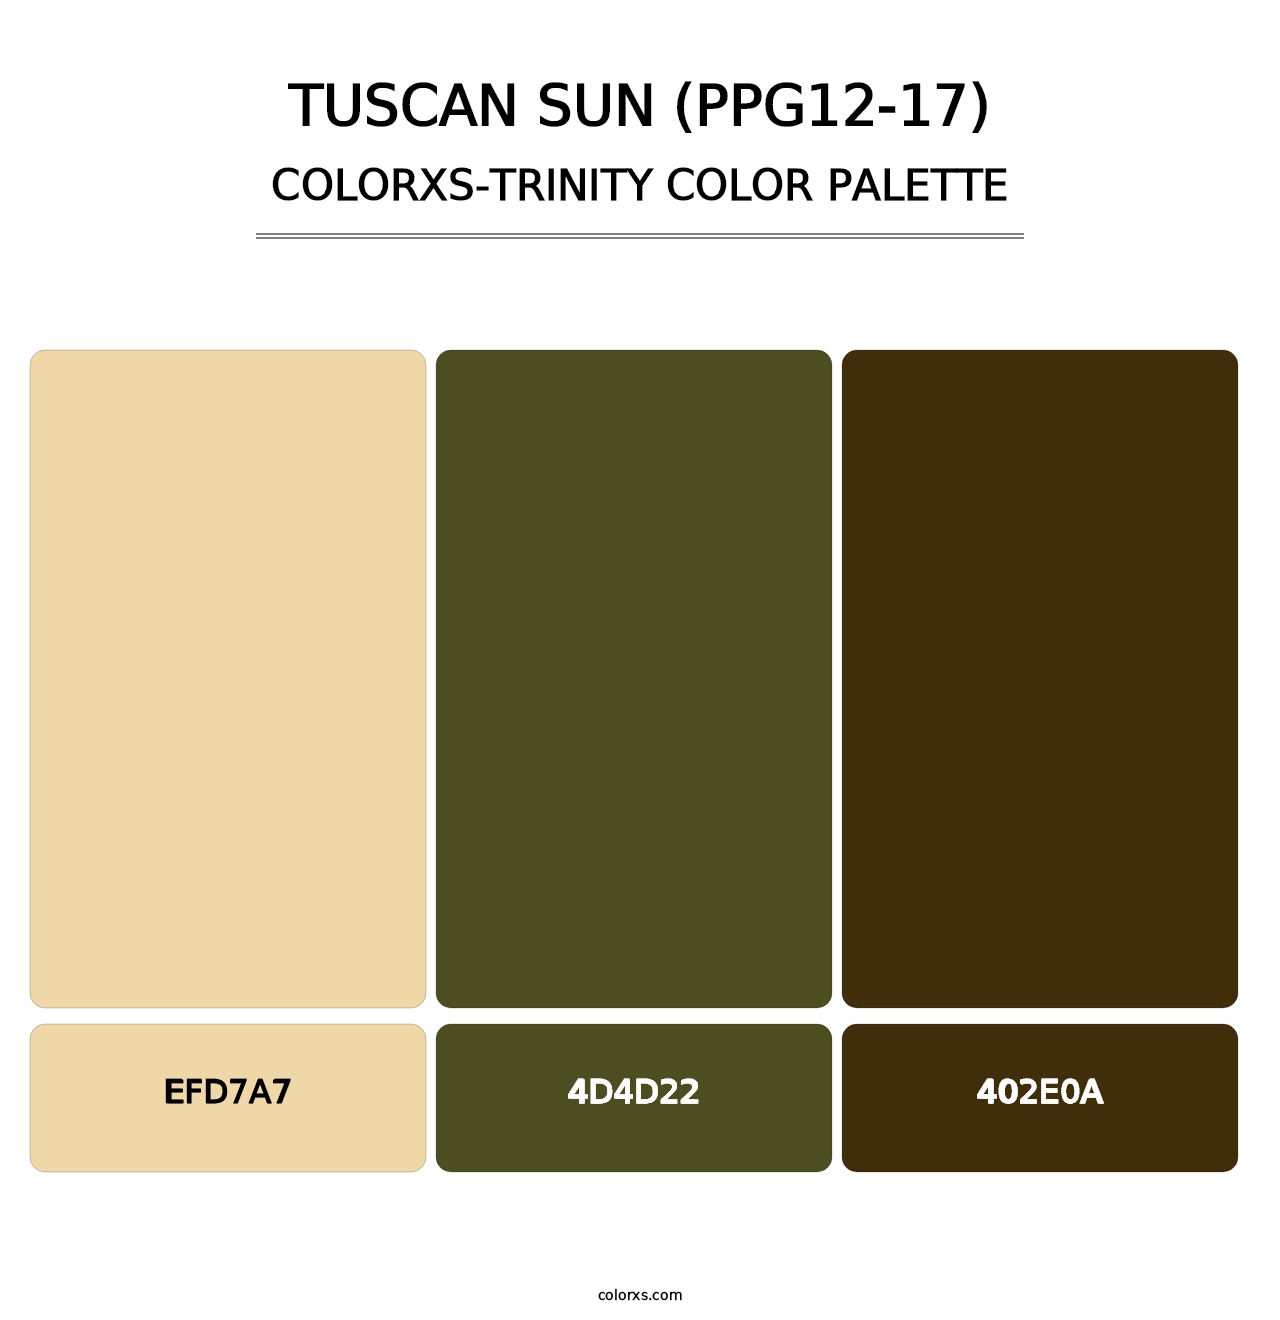 Tuscan Sun (PPG12-17) - Colorxs Trinity Palette